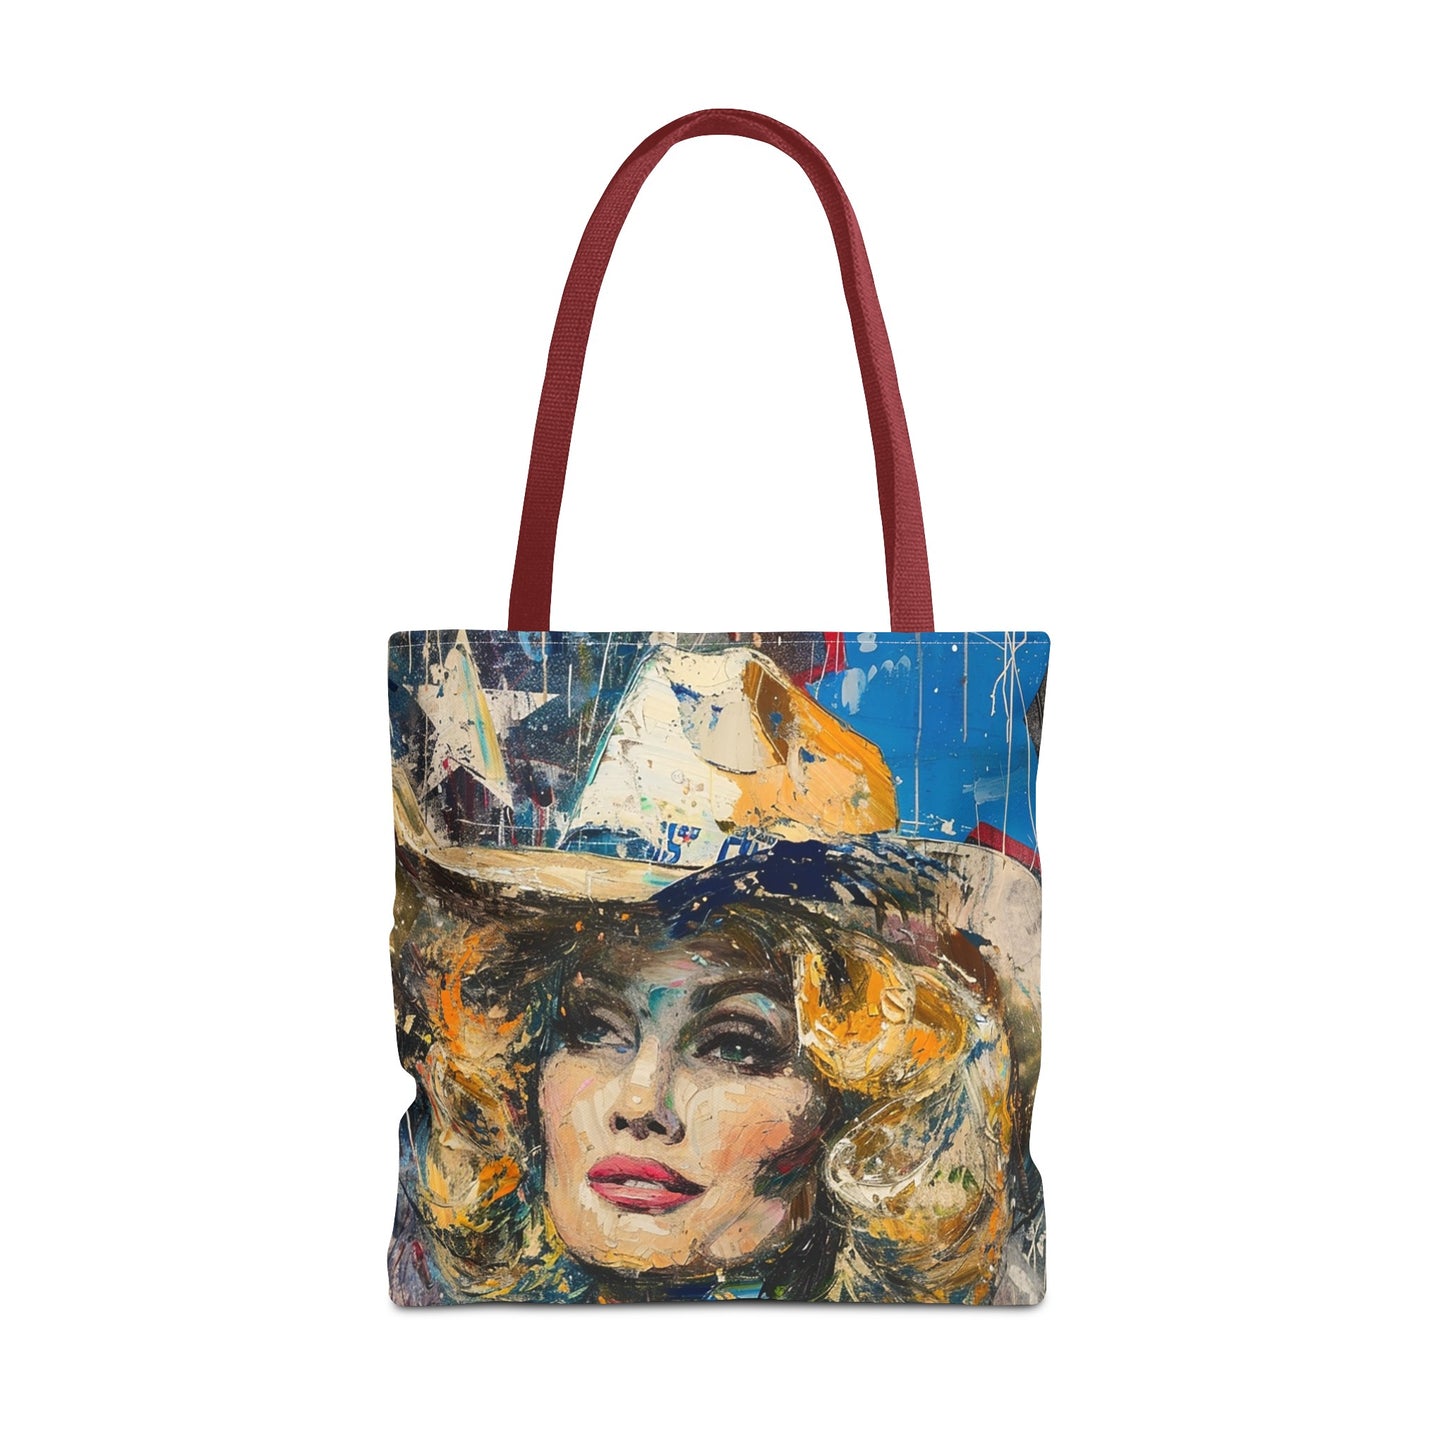 Tote Bag - Country Queen red handle